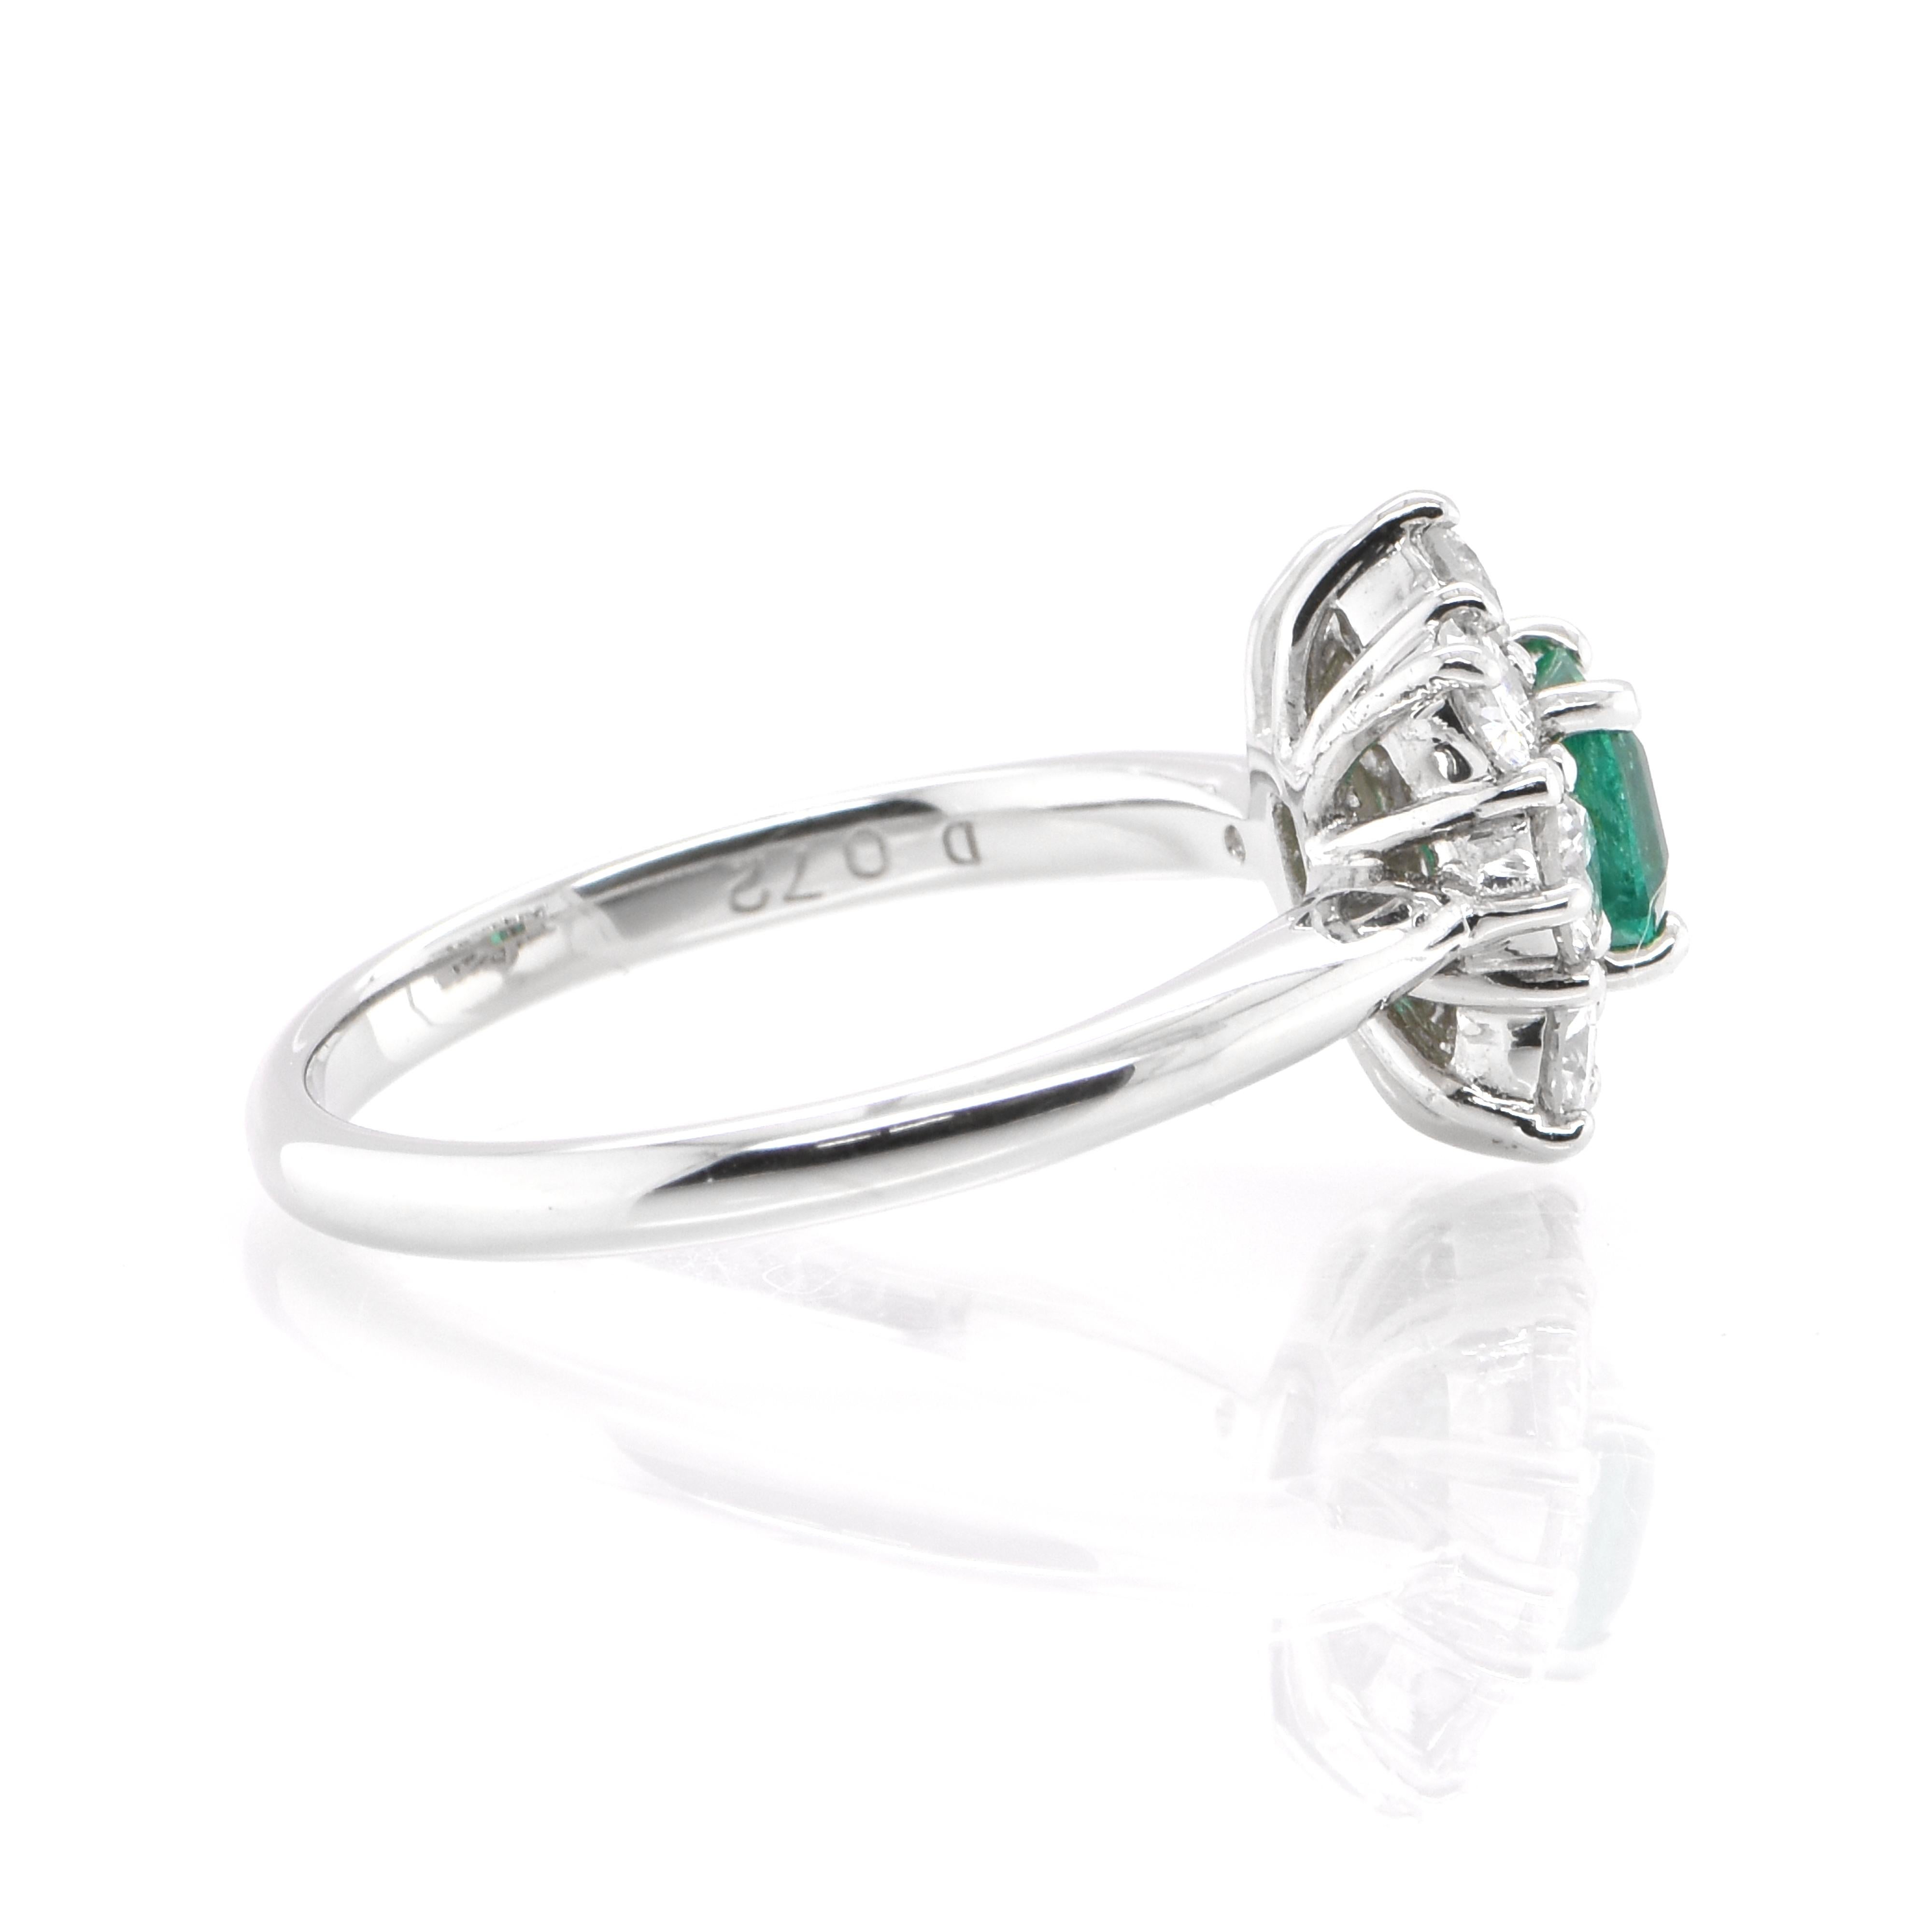 Women's 0.48 Carat Natural Colombian Emerald and Diamond Ring Set in Platinum For Sale